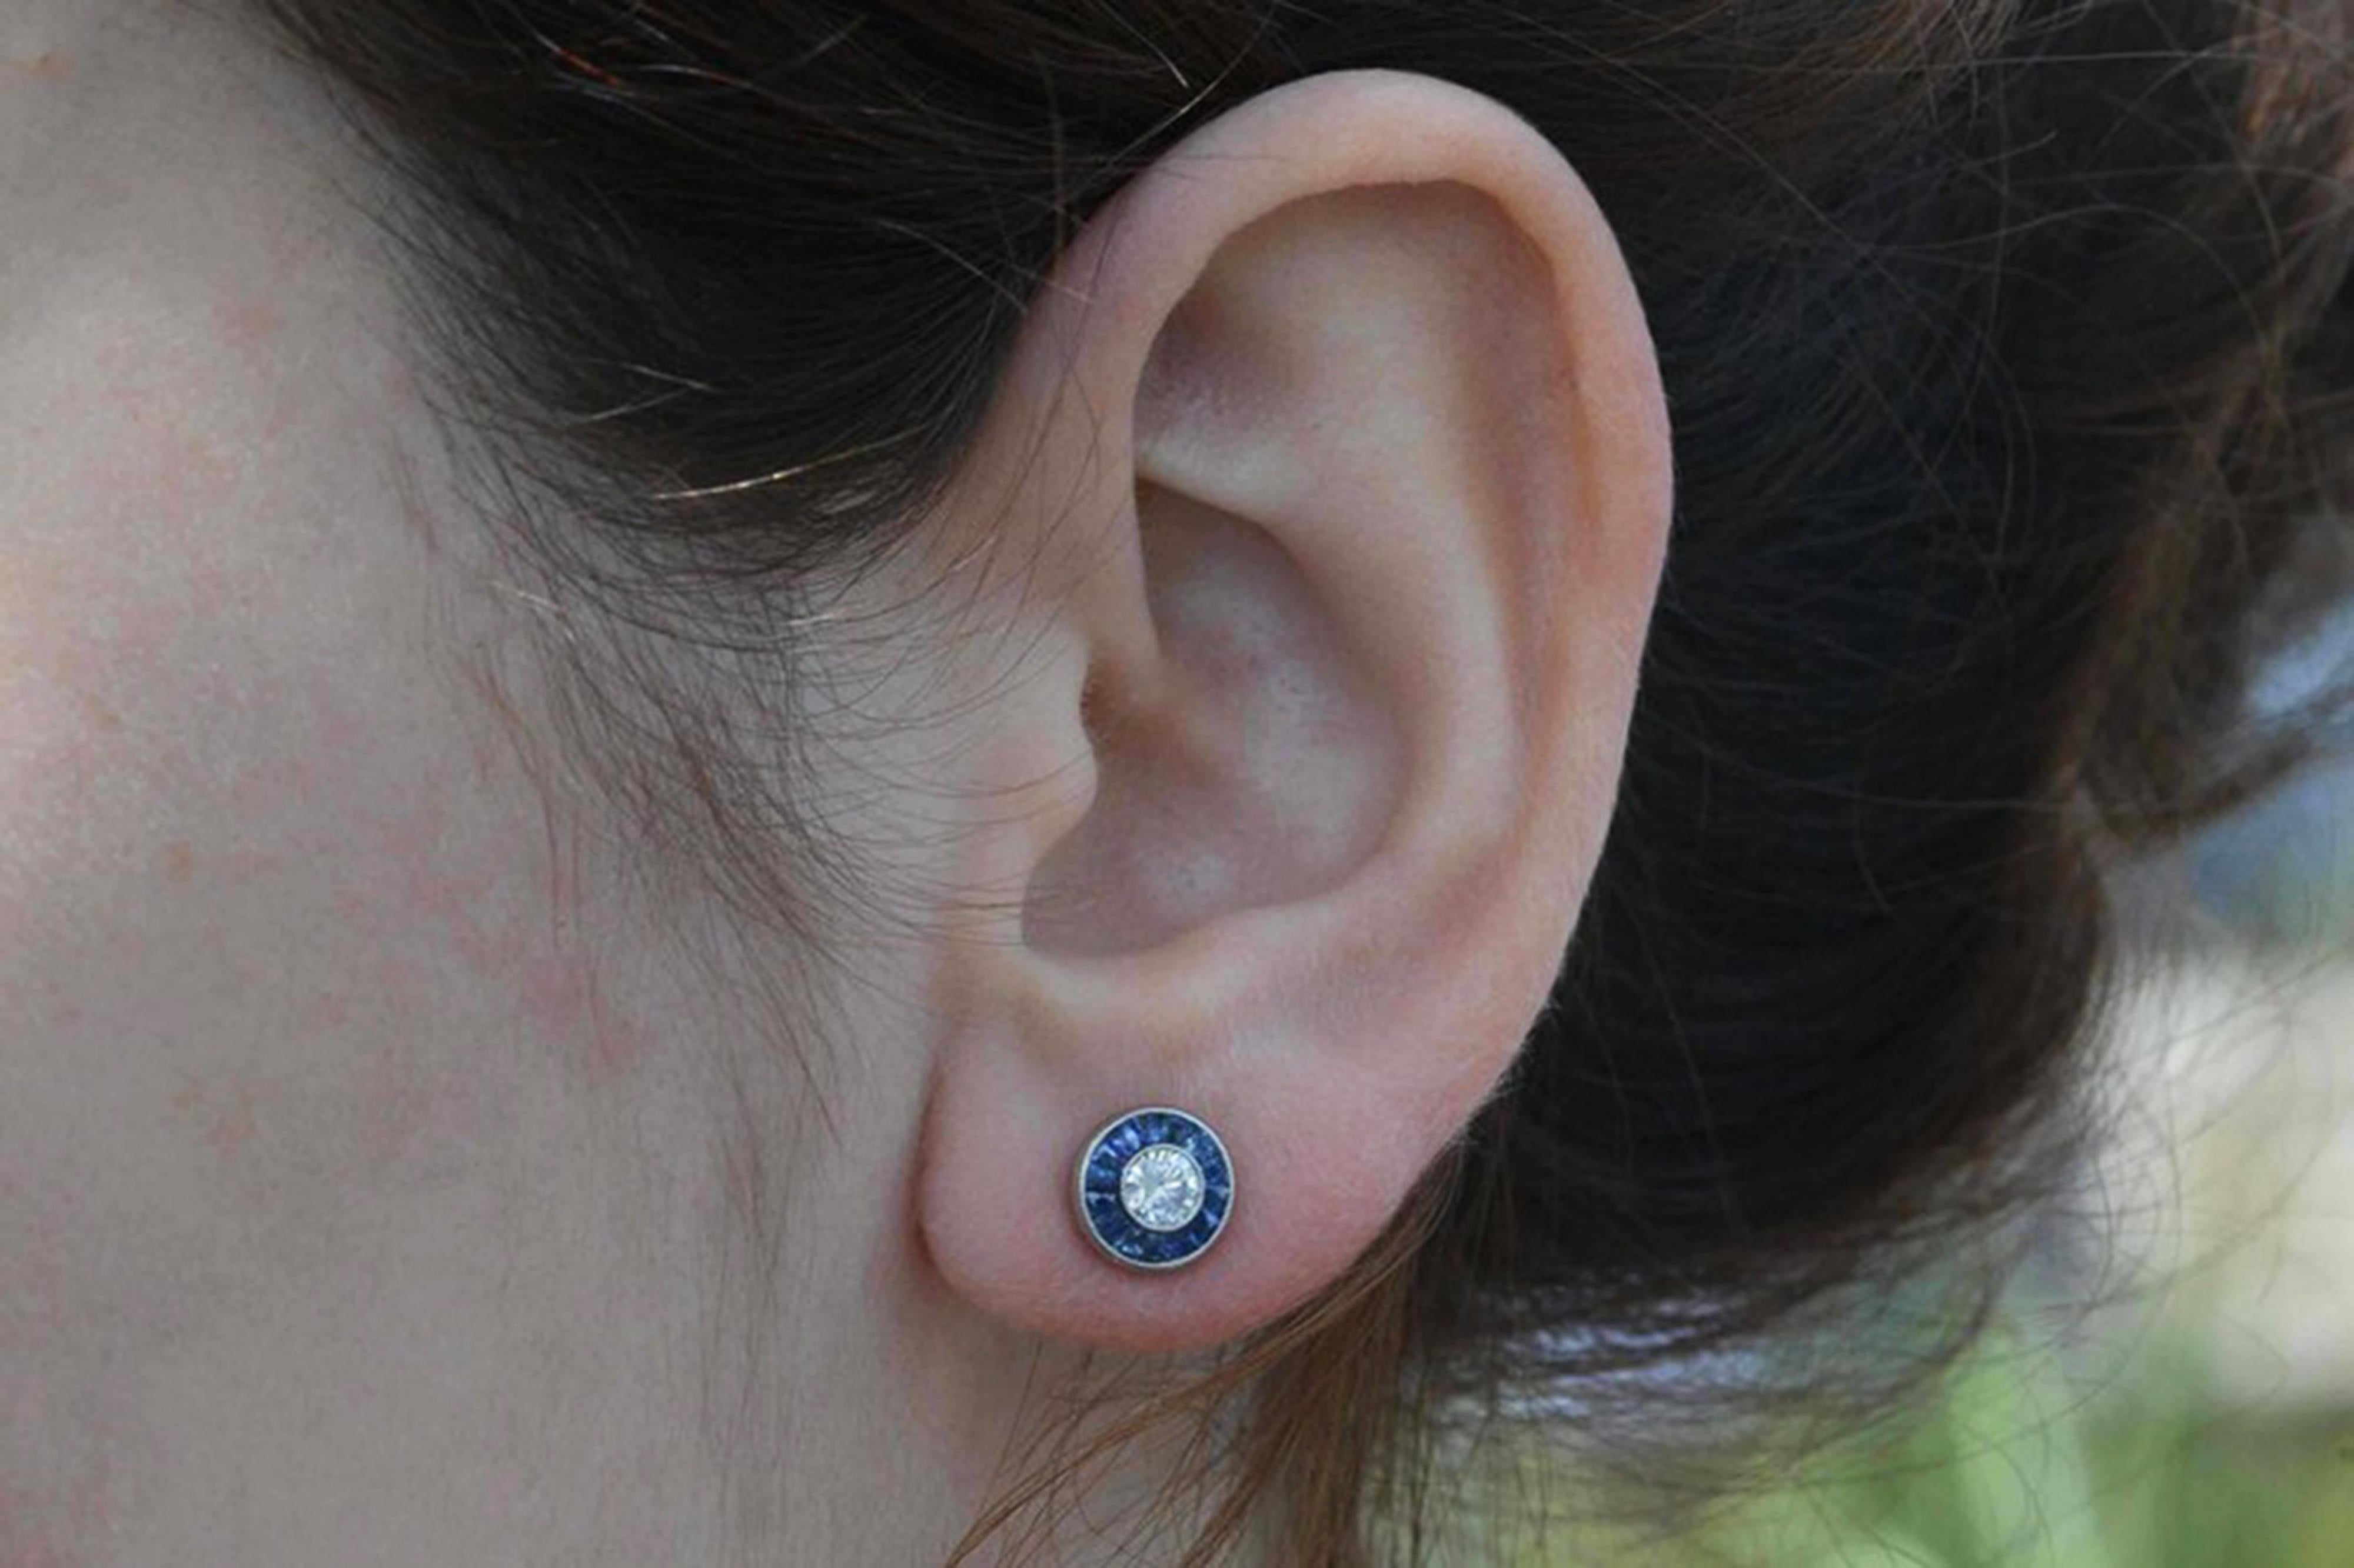 An affordable pair of Art Deco style diamond stud earrings. The sizzling, 1/2 carat total weight round brilliant diamonds really sparkle and dance accompanied by a halo of velvety blue, natural sapphires. Called a target design due to the